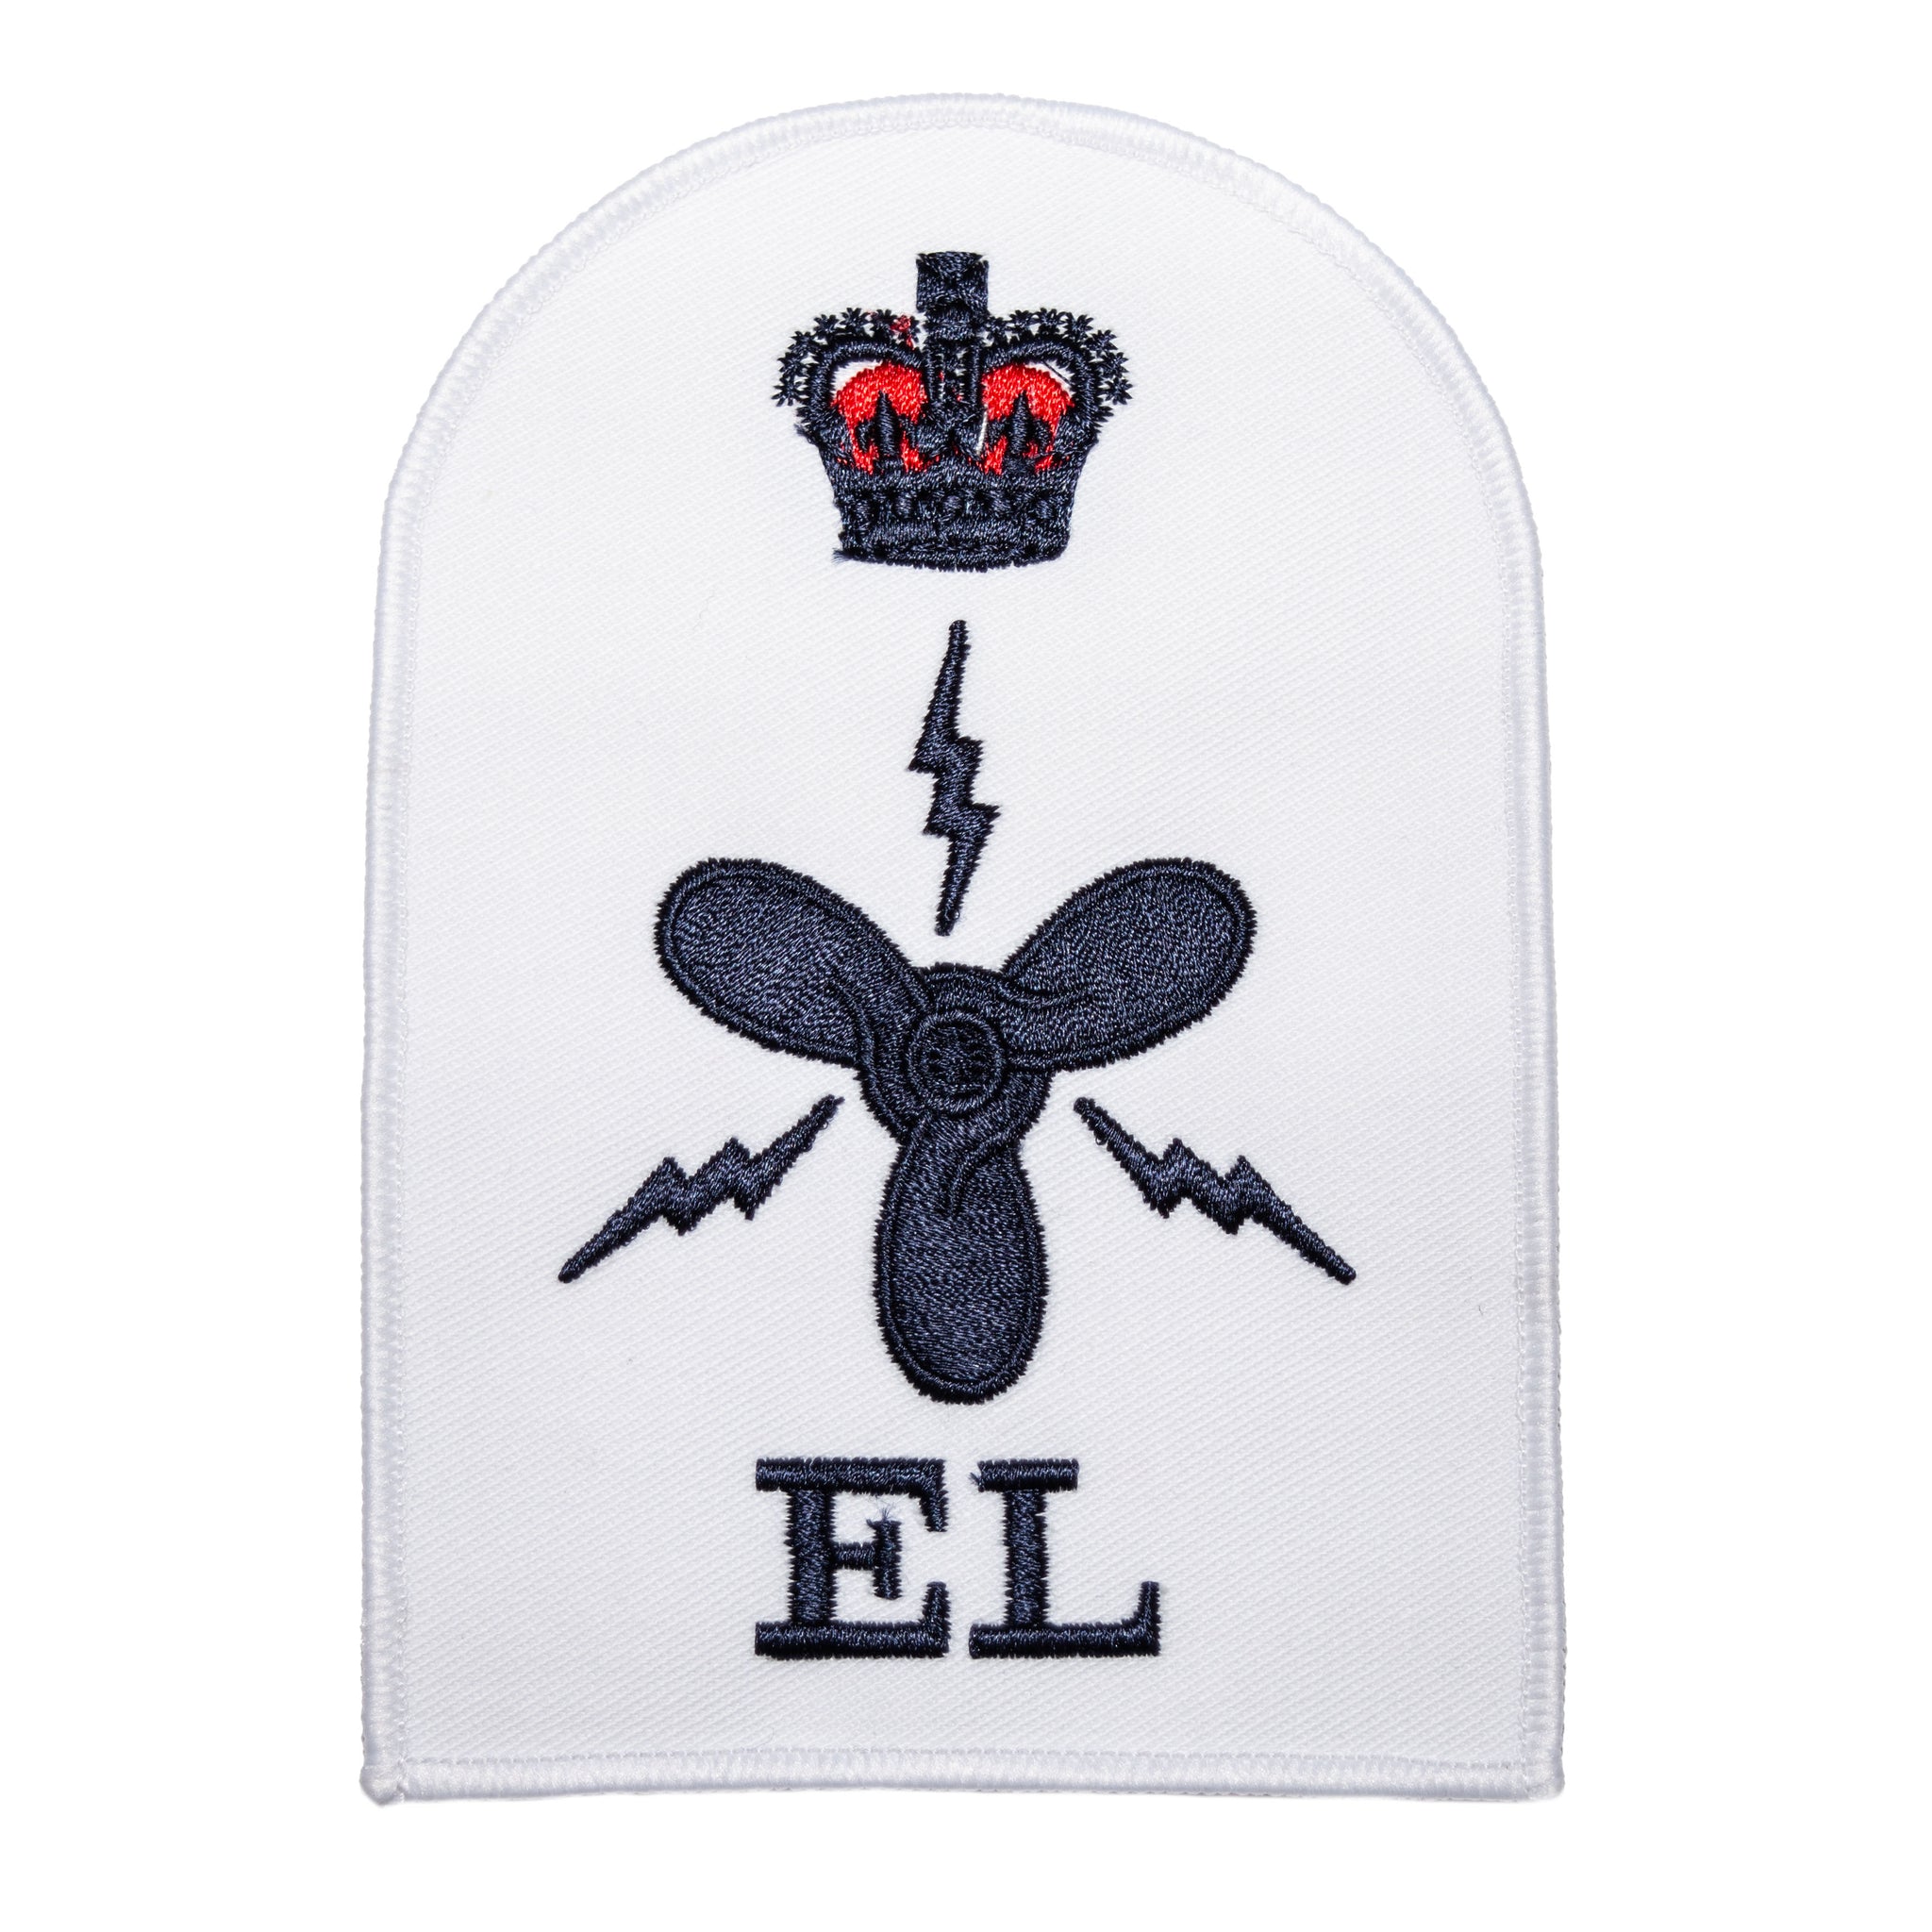 Marine Engineering Branch Electrical Petty Officer Royal Navy Badge